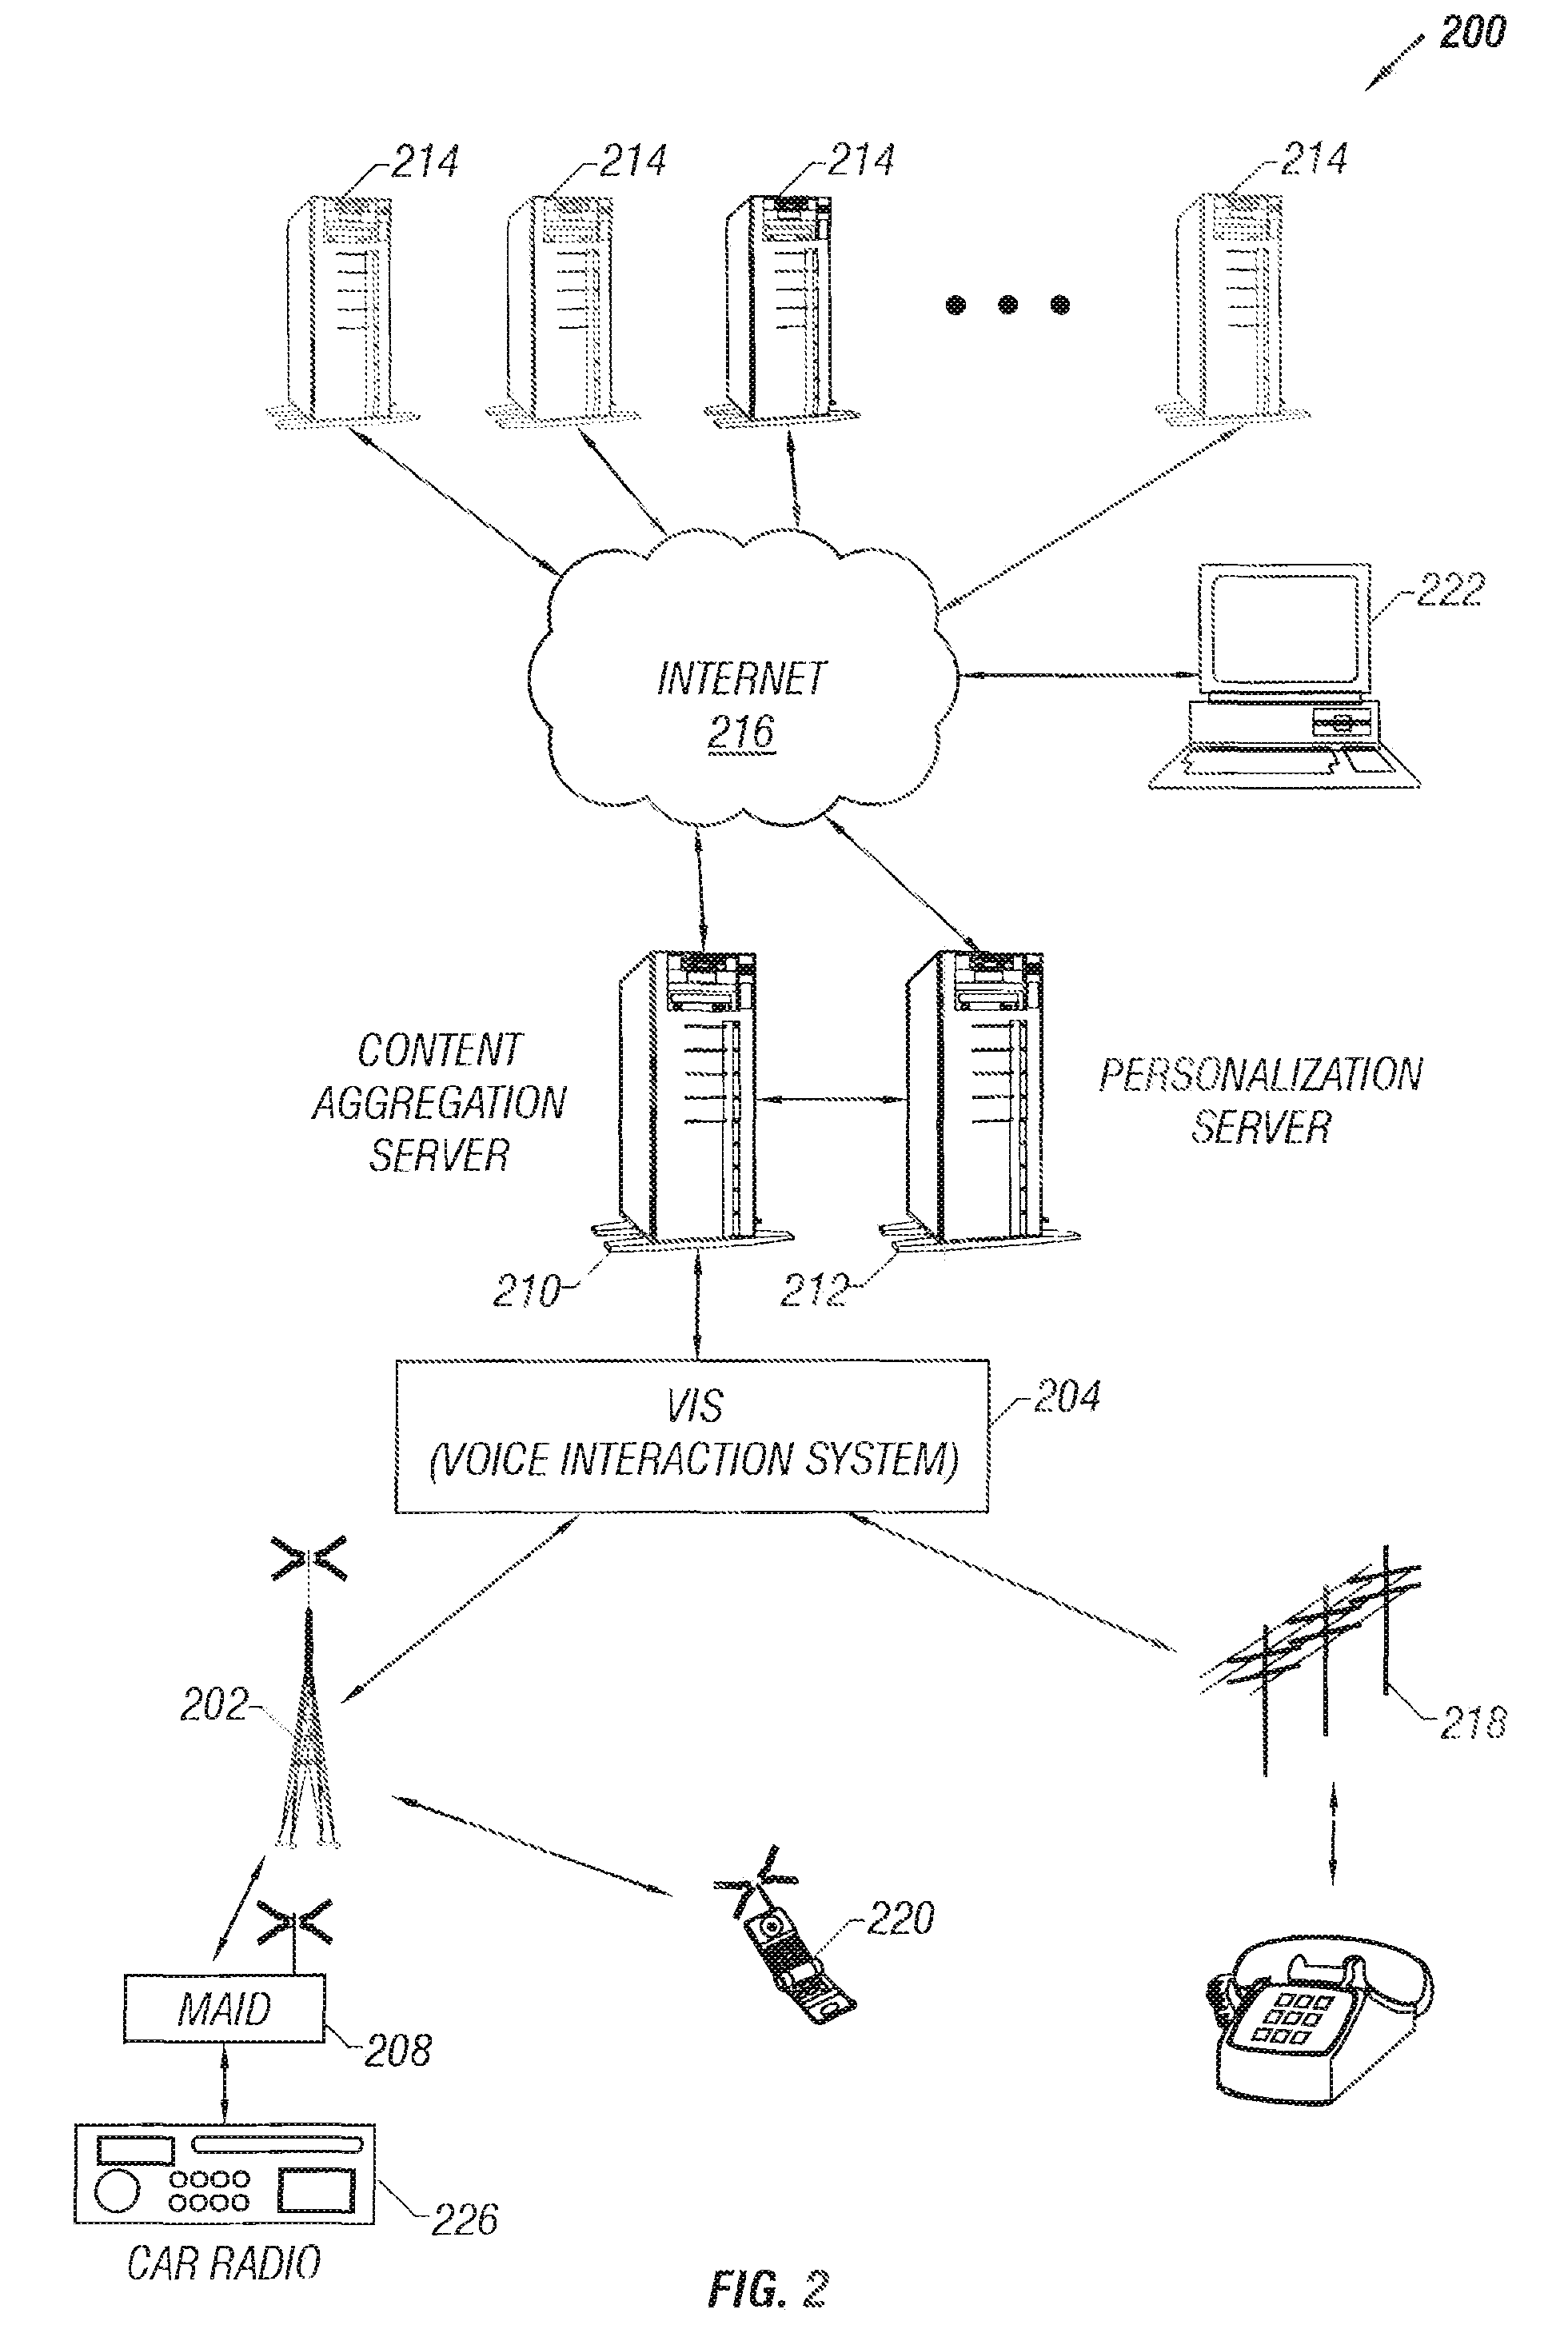 Portable browser device with voice recognition and feedback capability